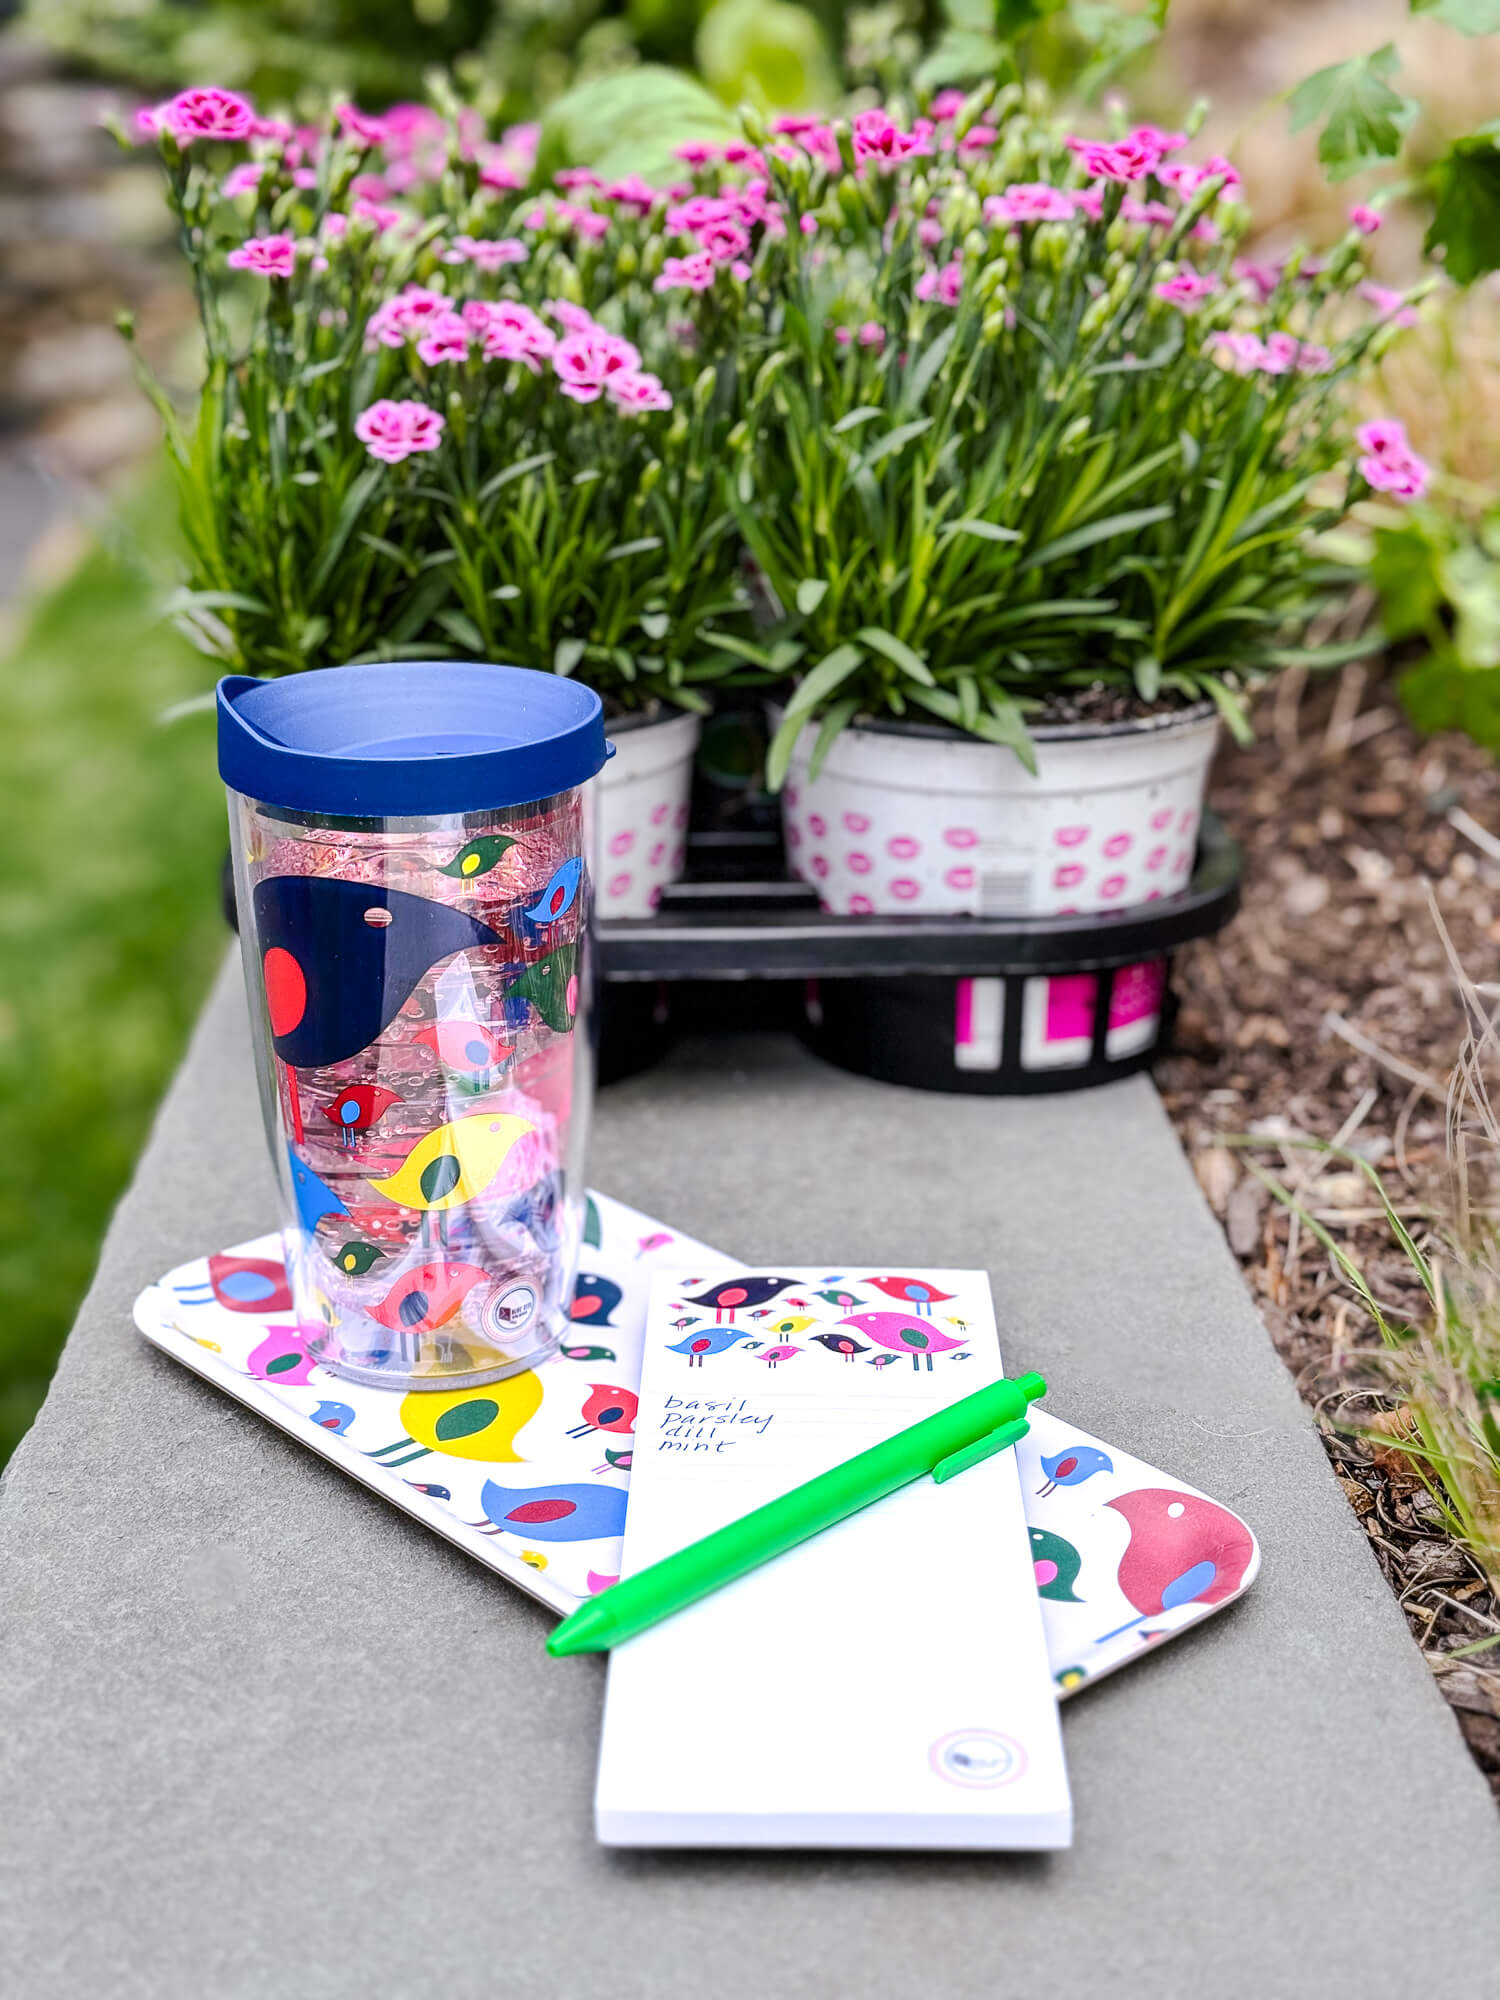 Tervis tumbler, notepad and tray decorated with colorful birds in garden